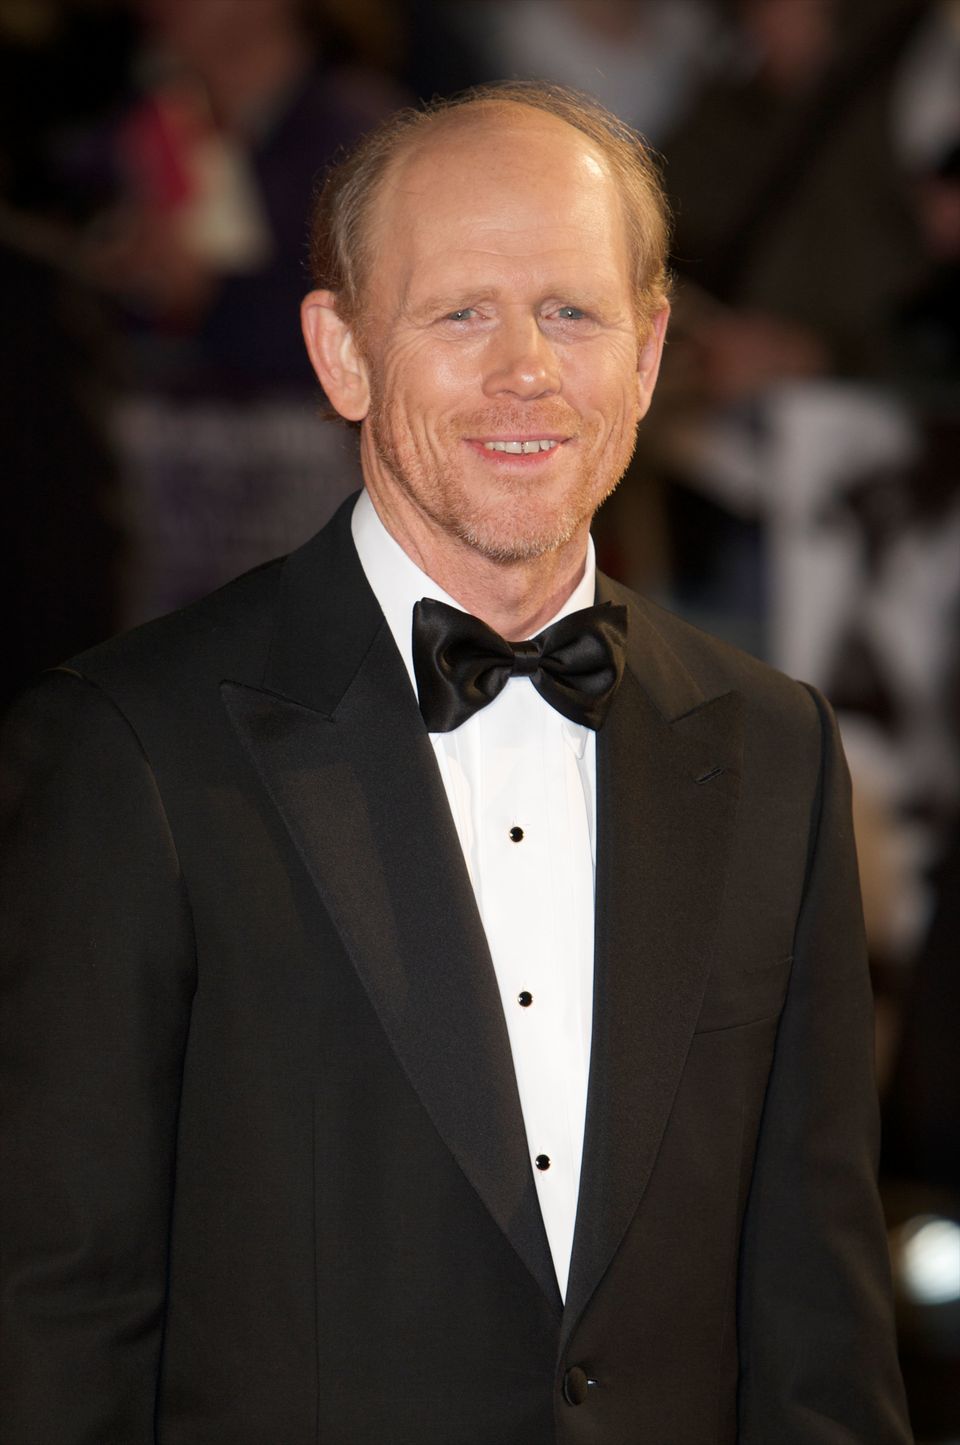 Ron Howard: Now